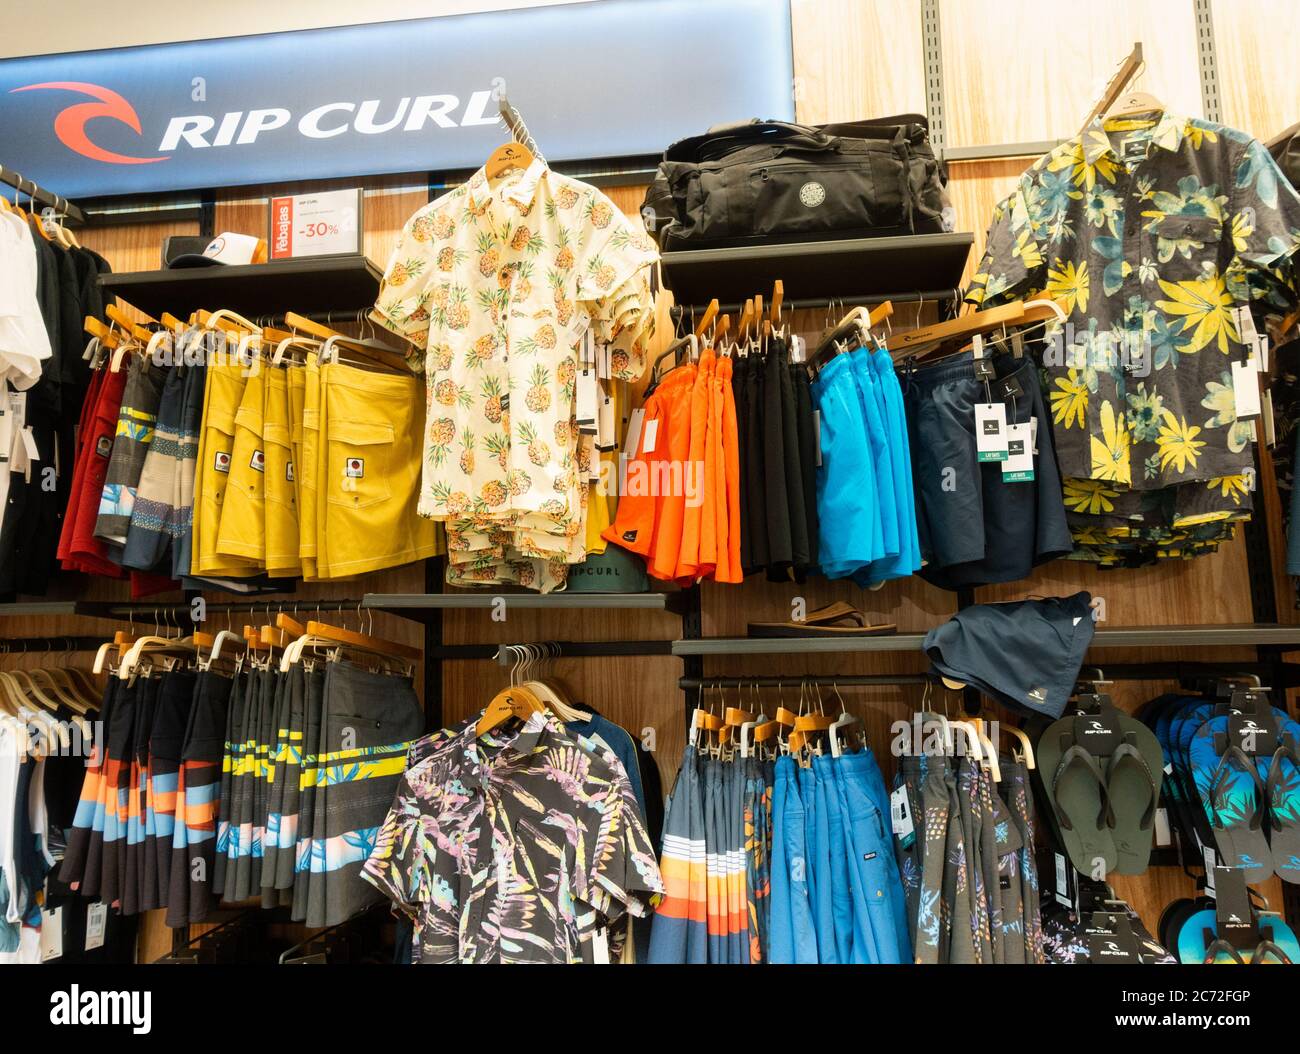 Rip Curl surfwear clothing display in surf shop Stock Photo - Alamy